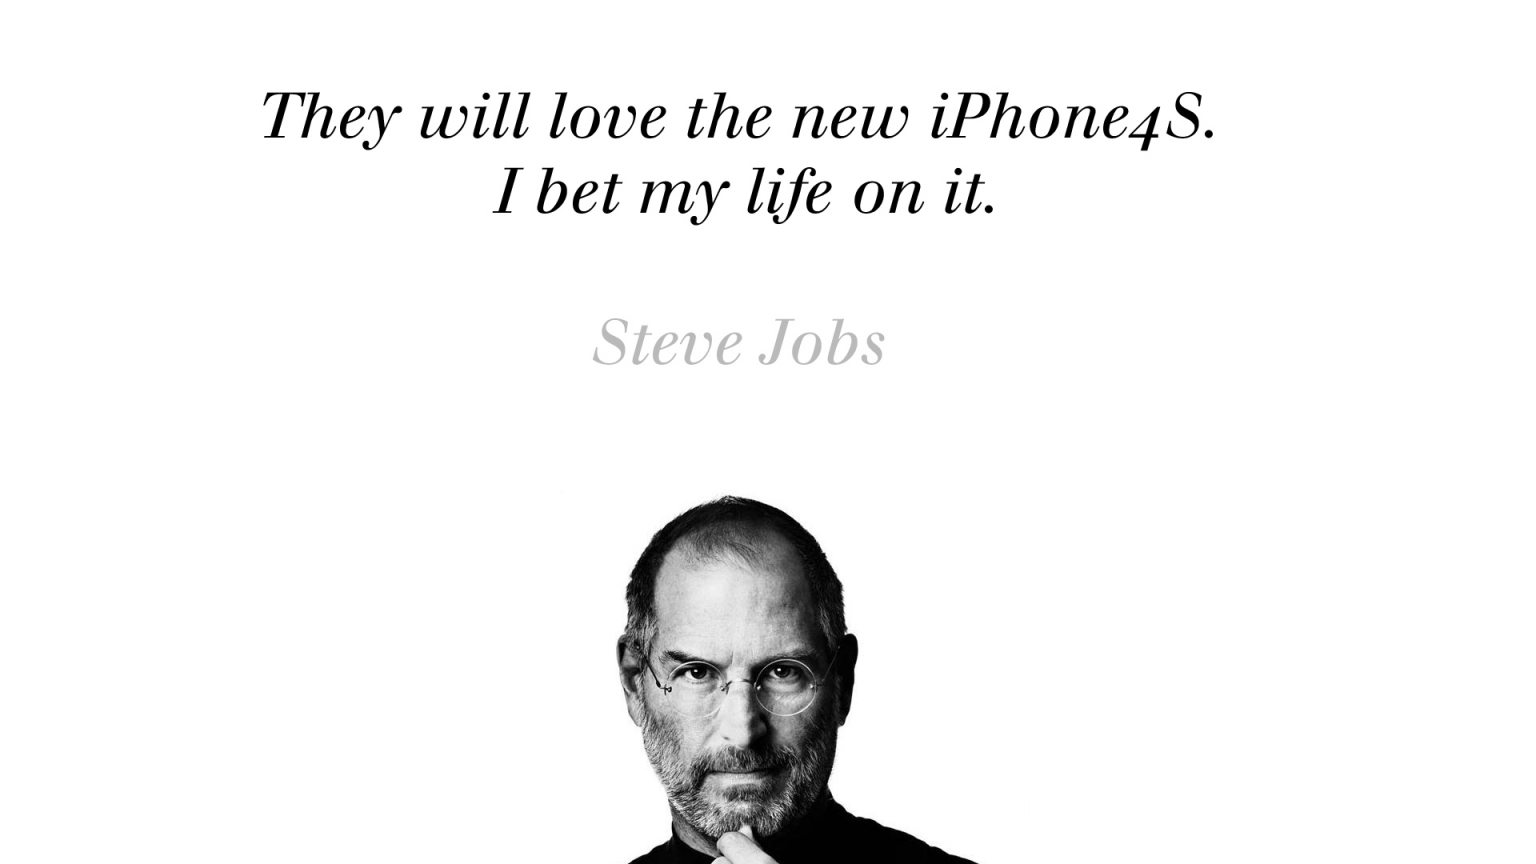 Steve Jobs about iPhone 4S for 1536 x 864 HDTV resolution